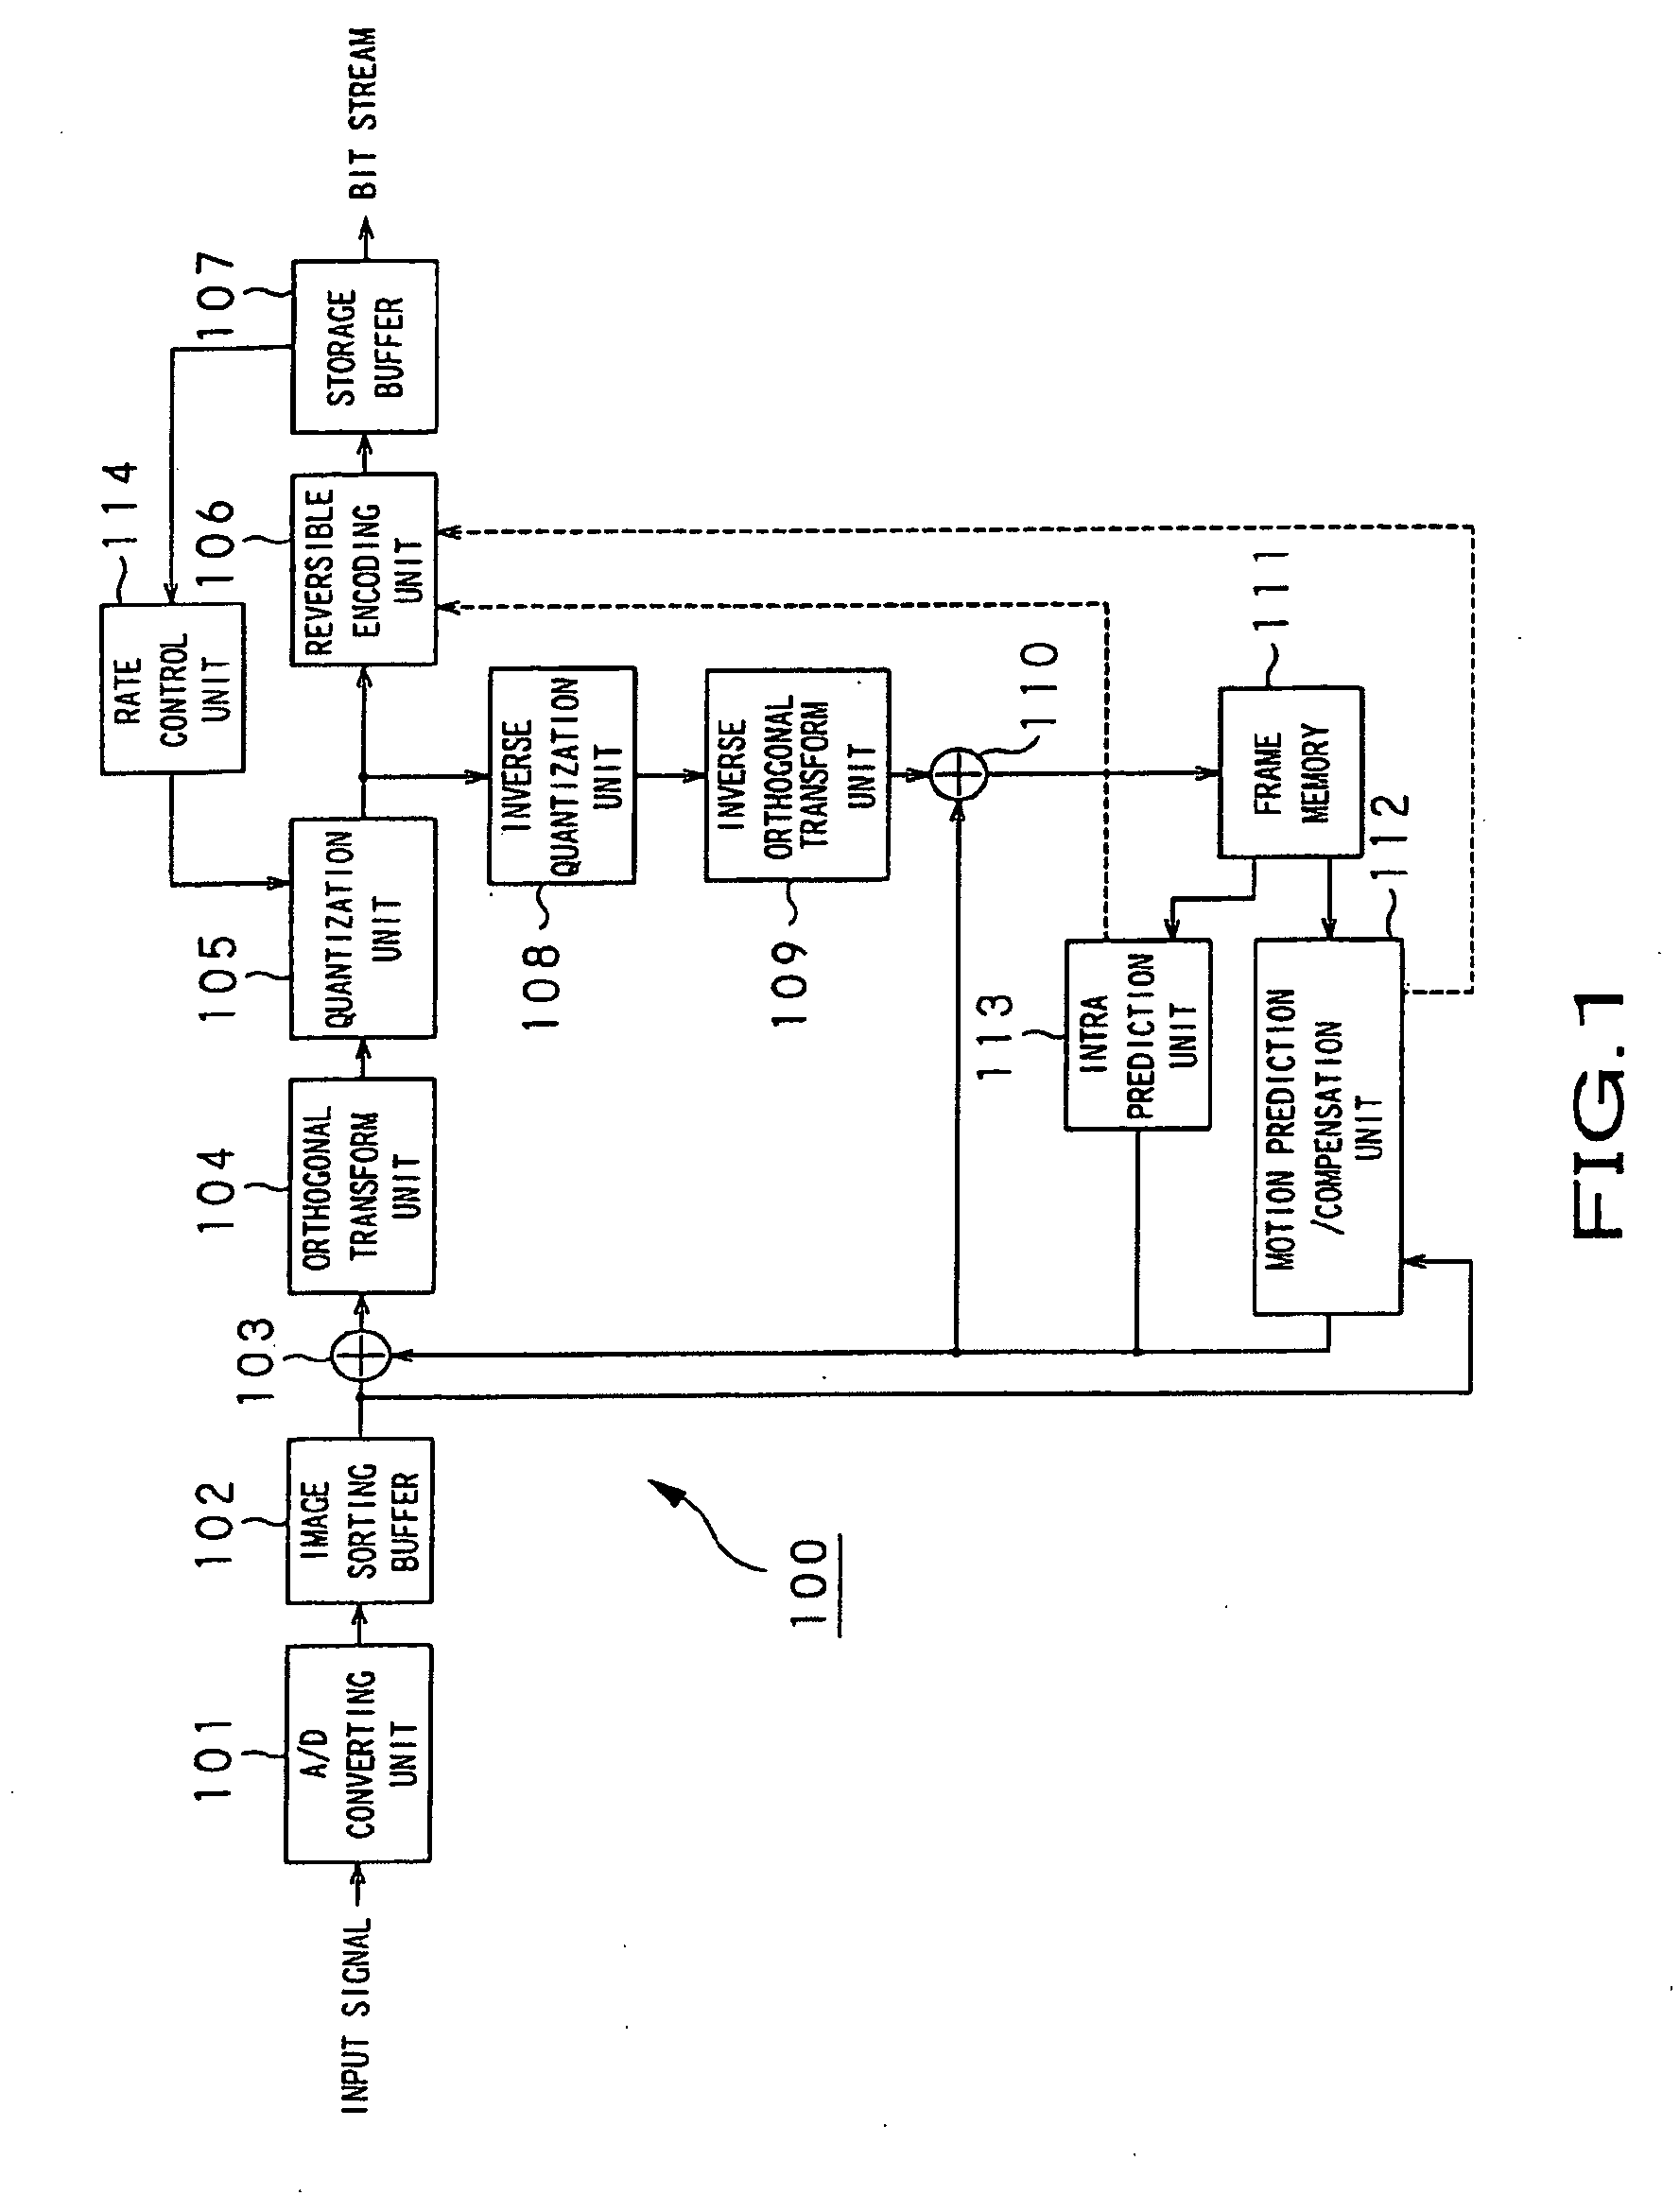 Image decoding apparatus and method for handling intra-image predictive decoding with various color spaces and color signal resolutions